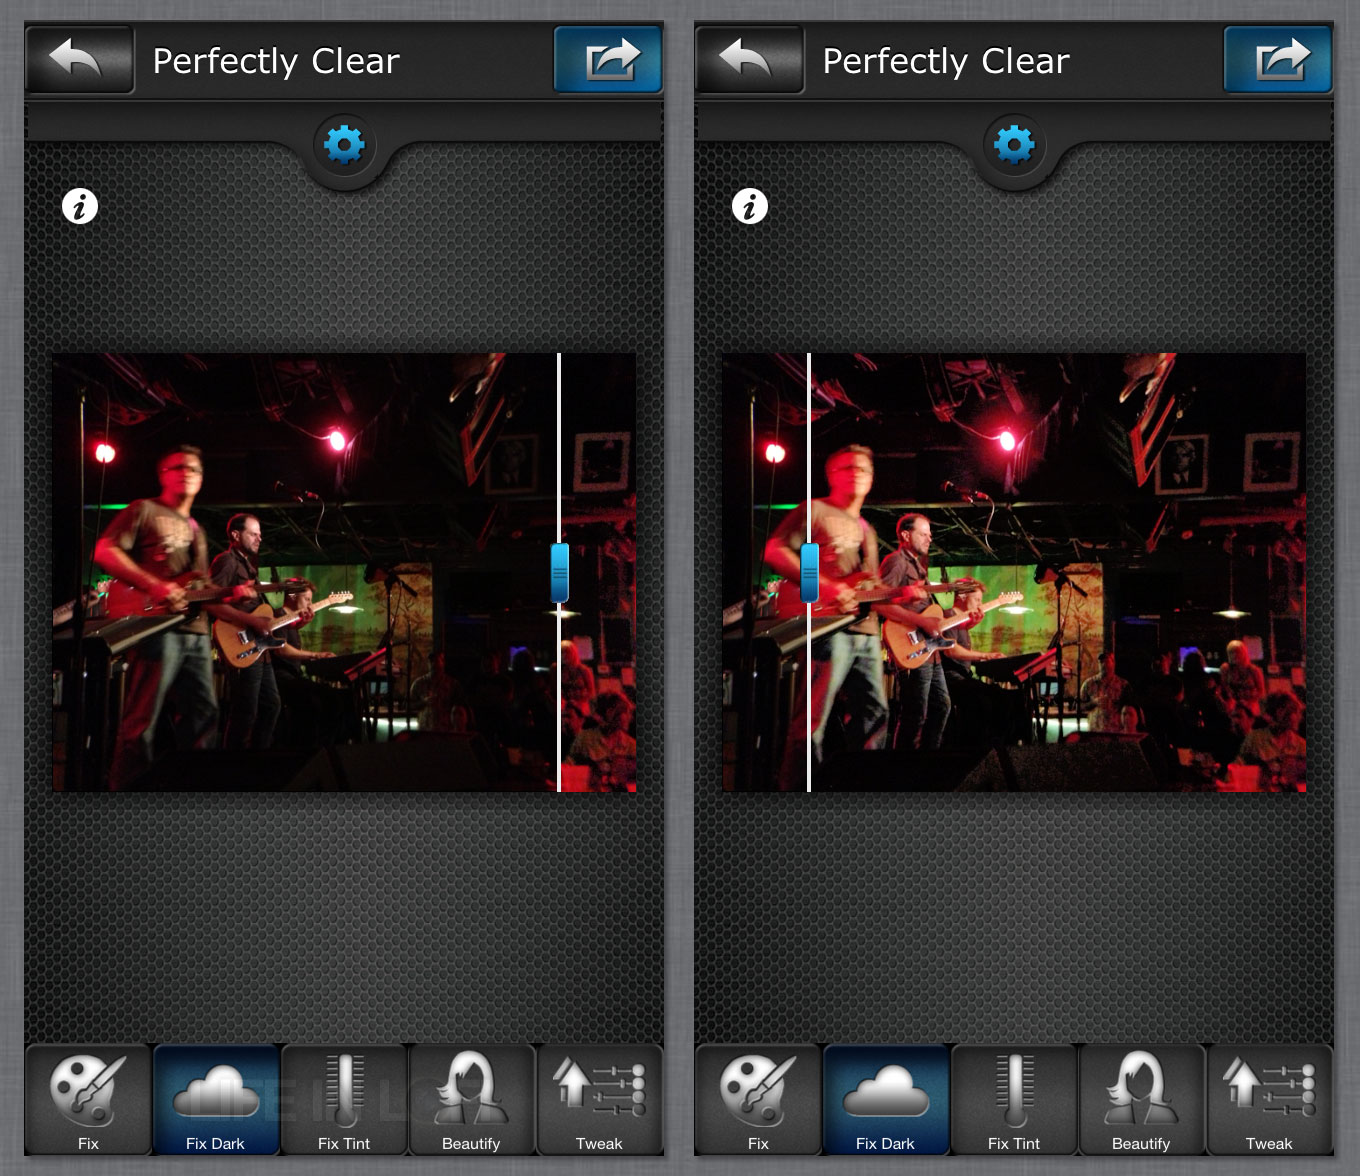 Perfectly Clear Video 4.5.0.2532 instal the new version for iphone